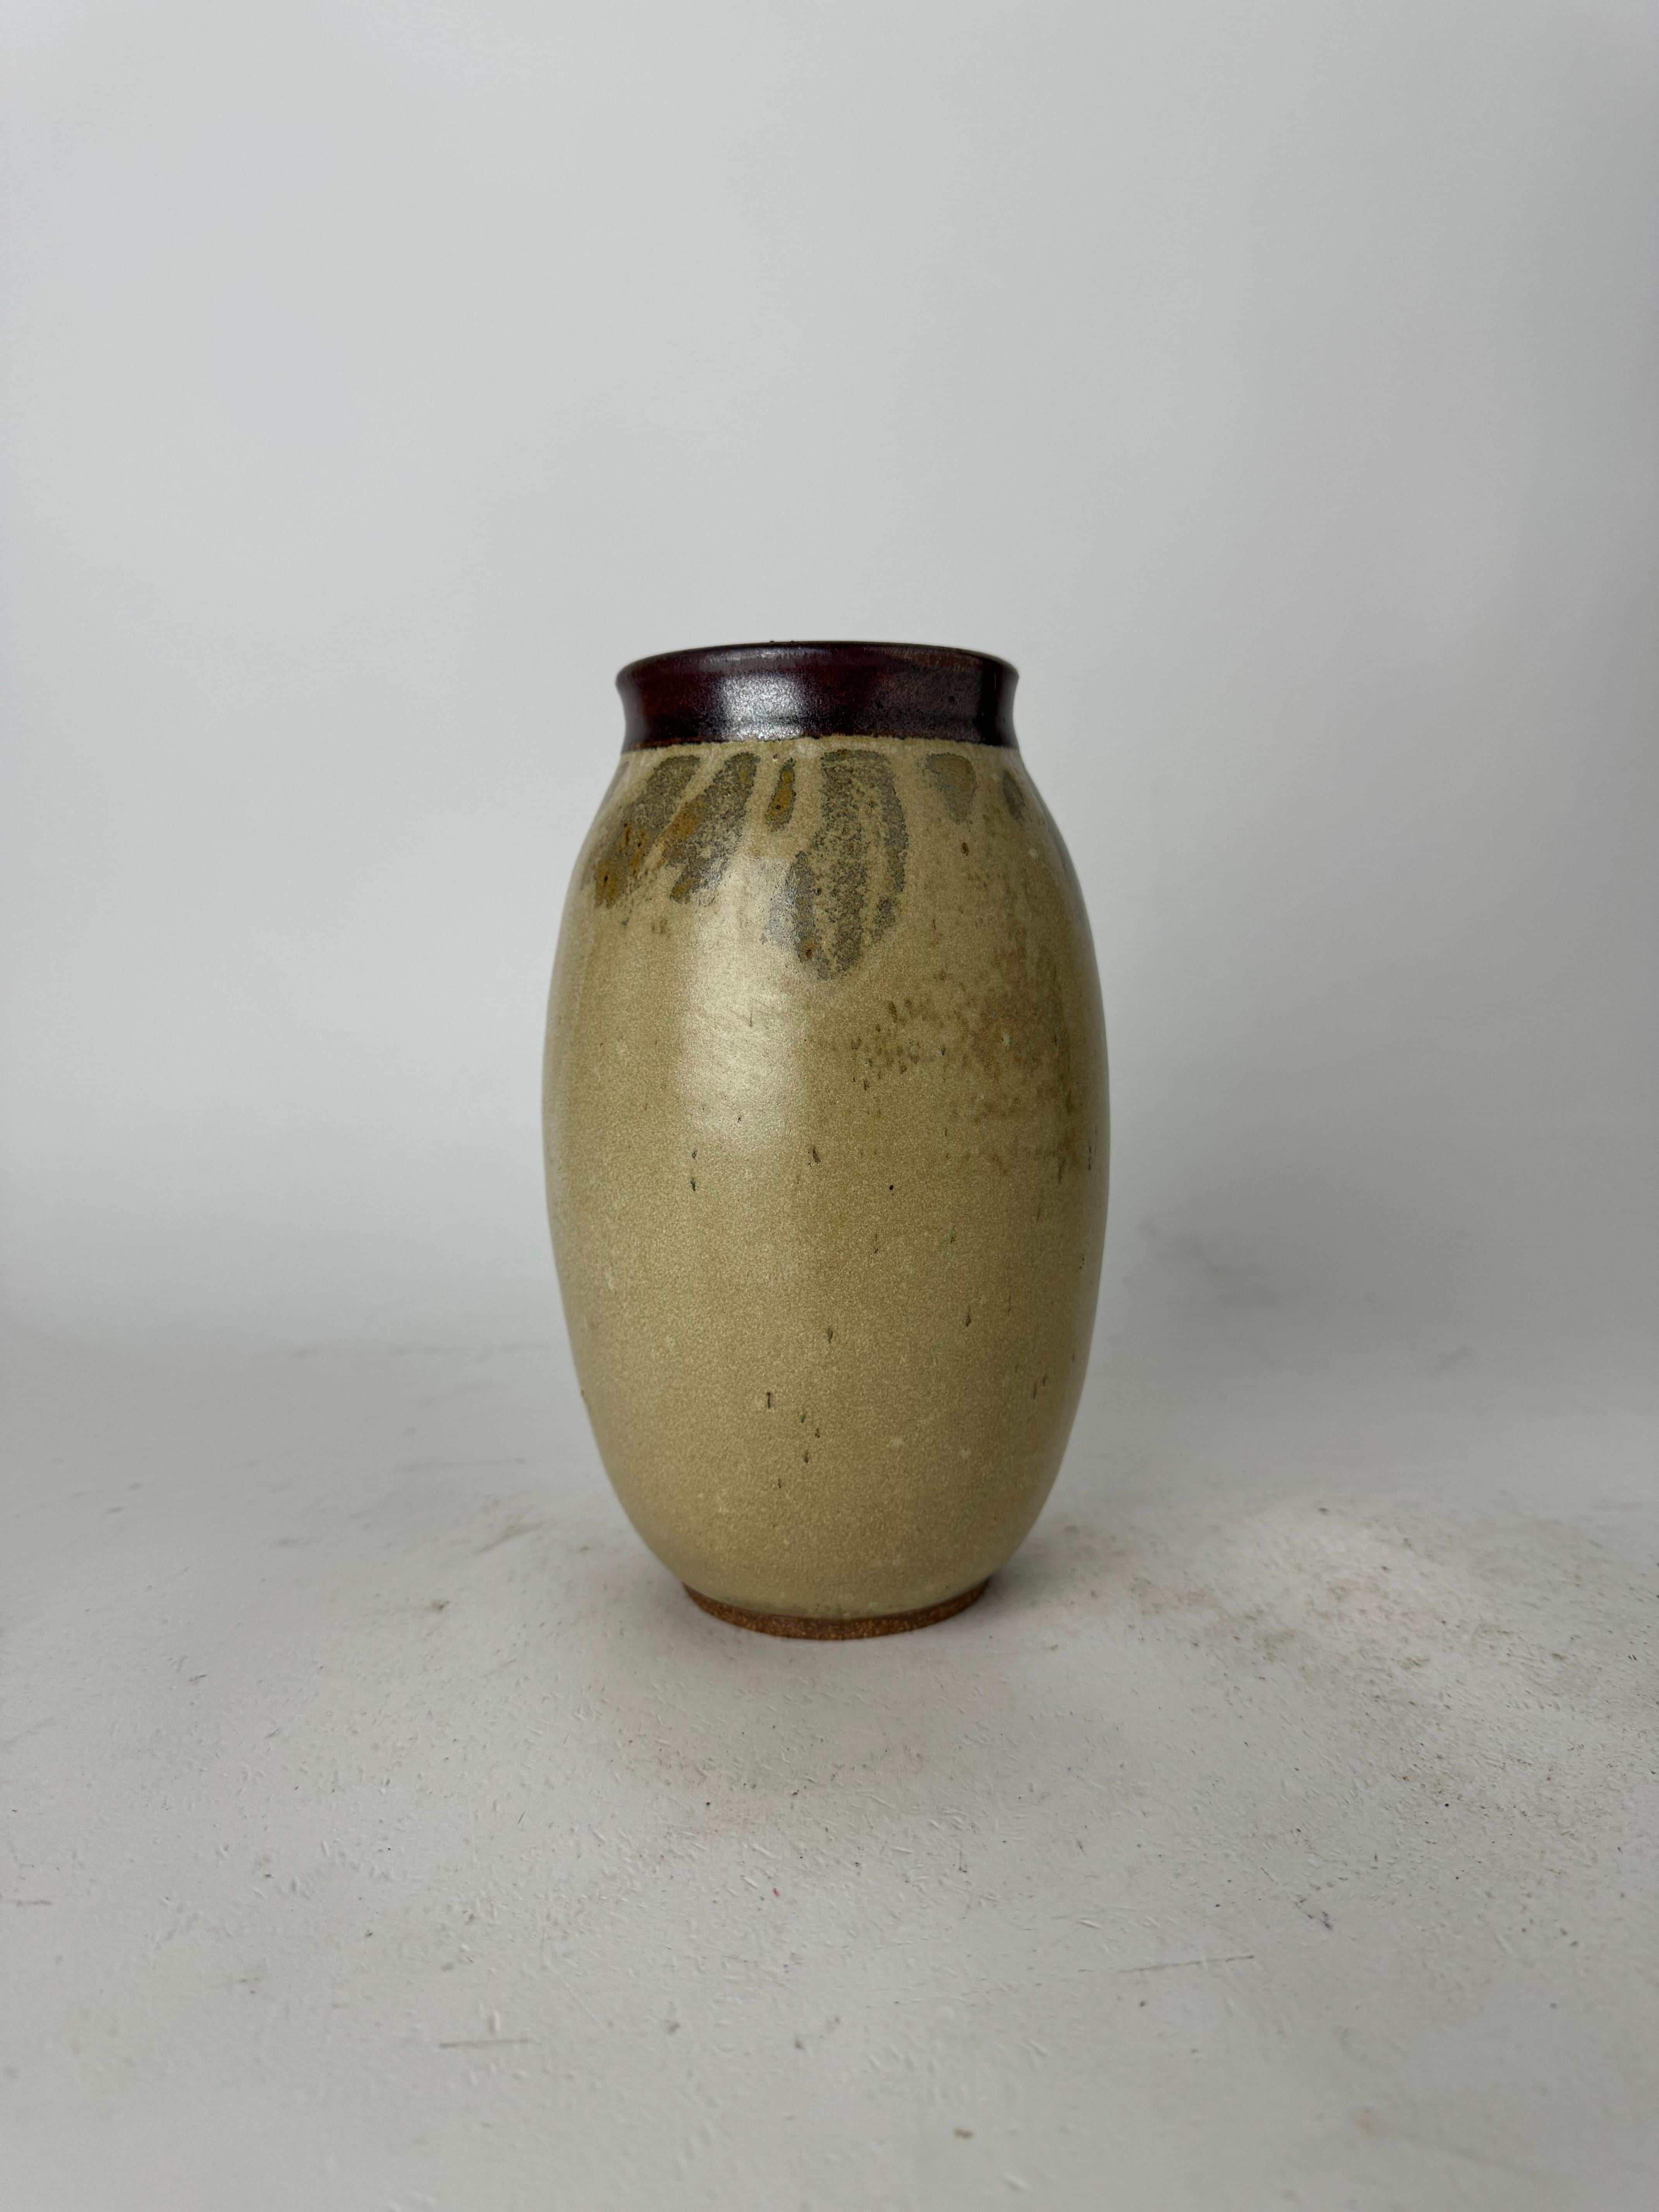 For sale, we present a captivating Vintage Hand-Thrown Studio Pottery Flower Vase, a true testament to craftsmanship and enduring beauty. Adorned in soothing shades of beige and brown, this vase is a statement piece that adds a touch of vintage